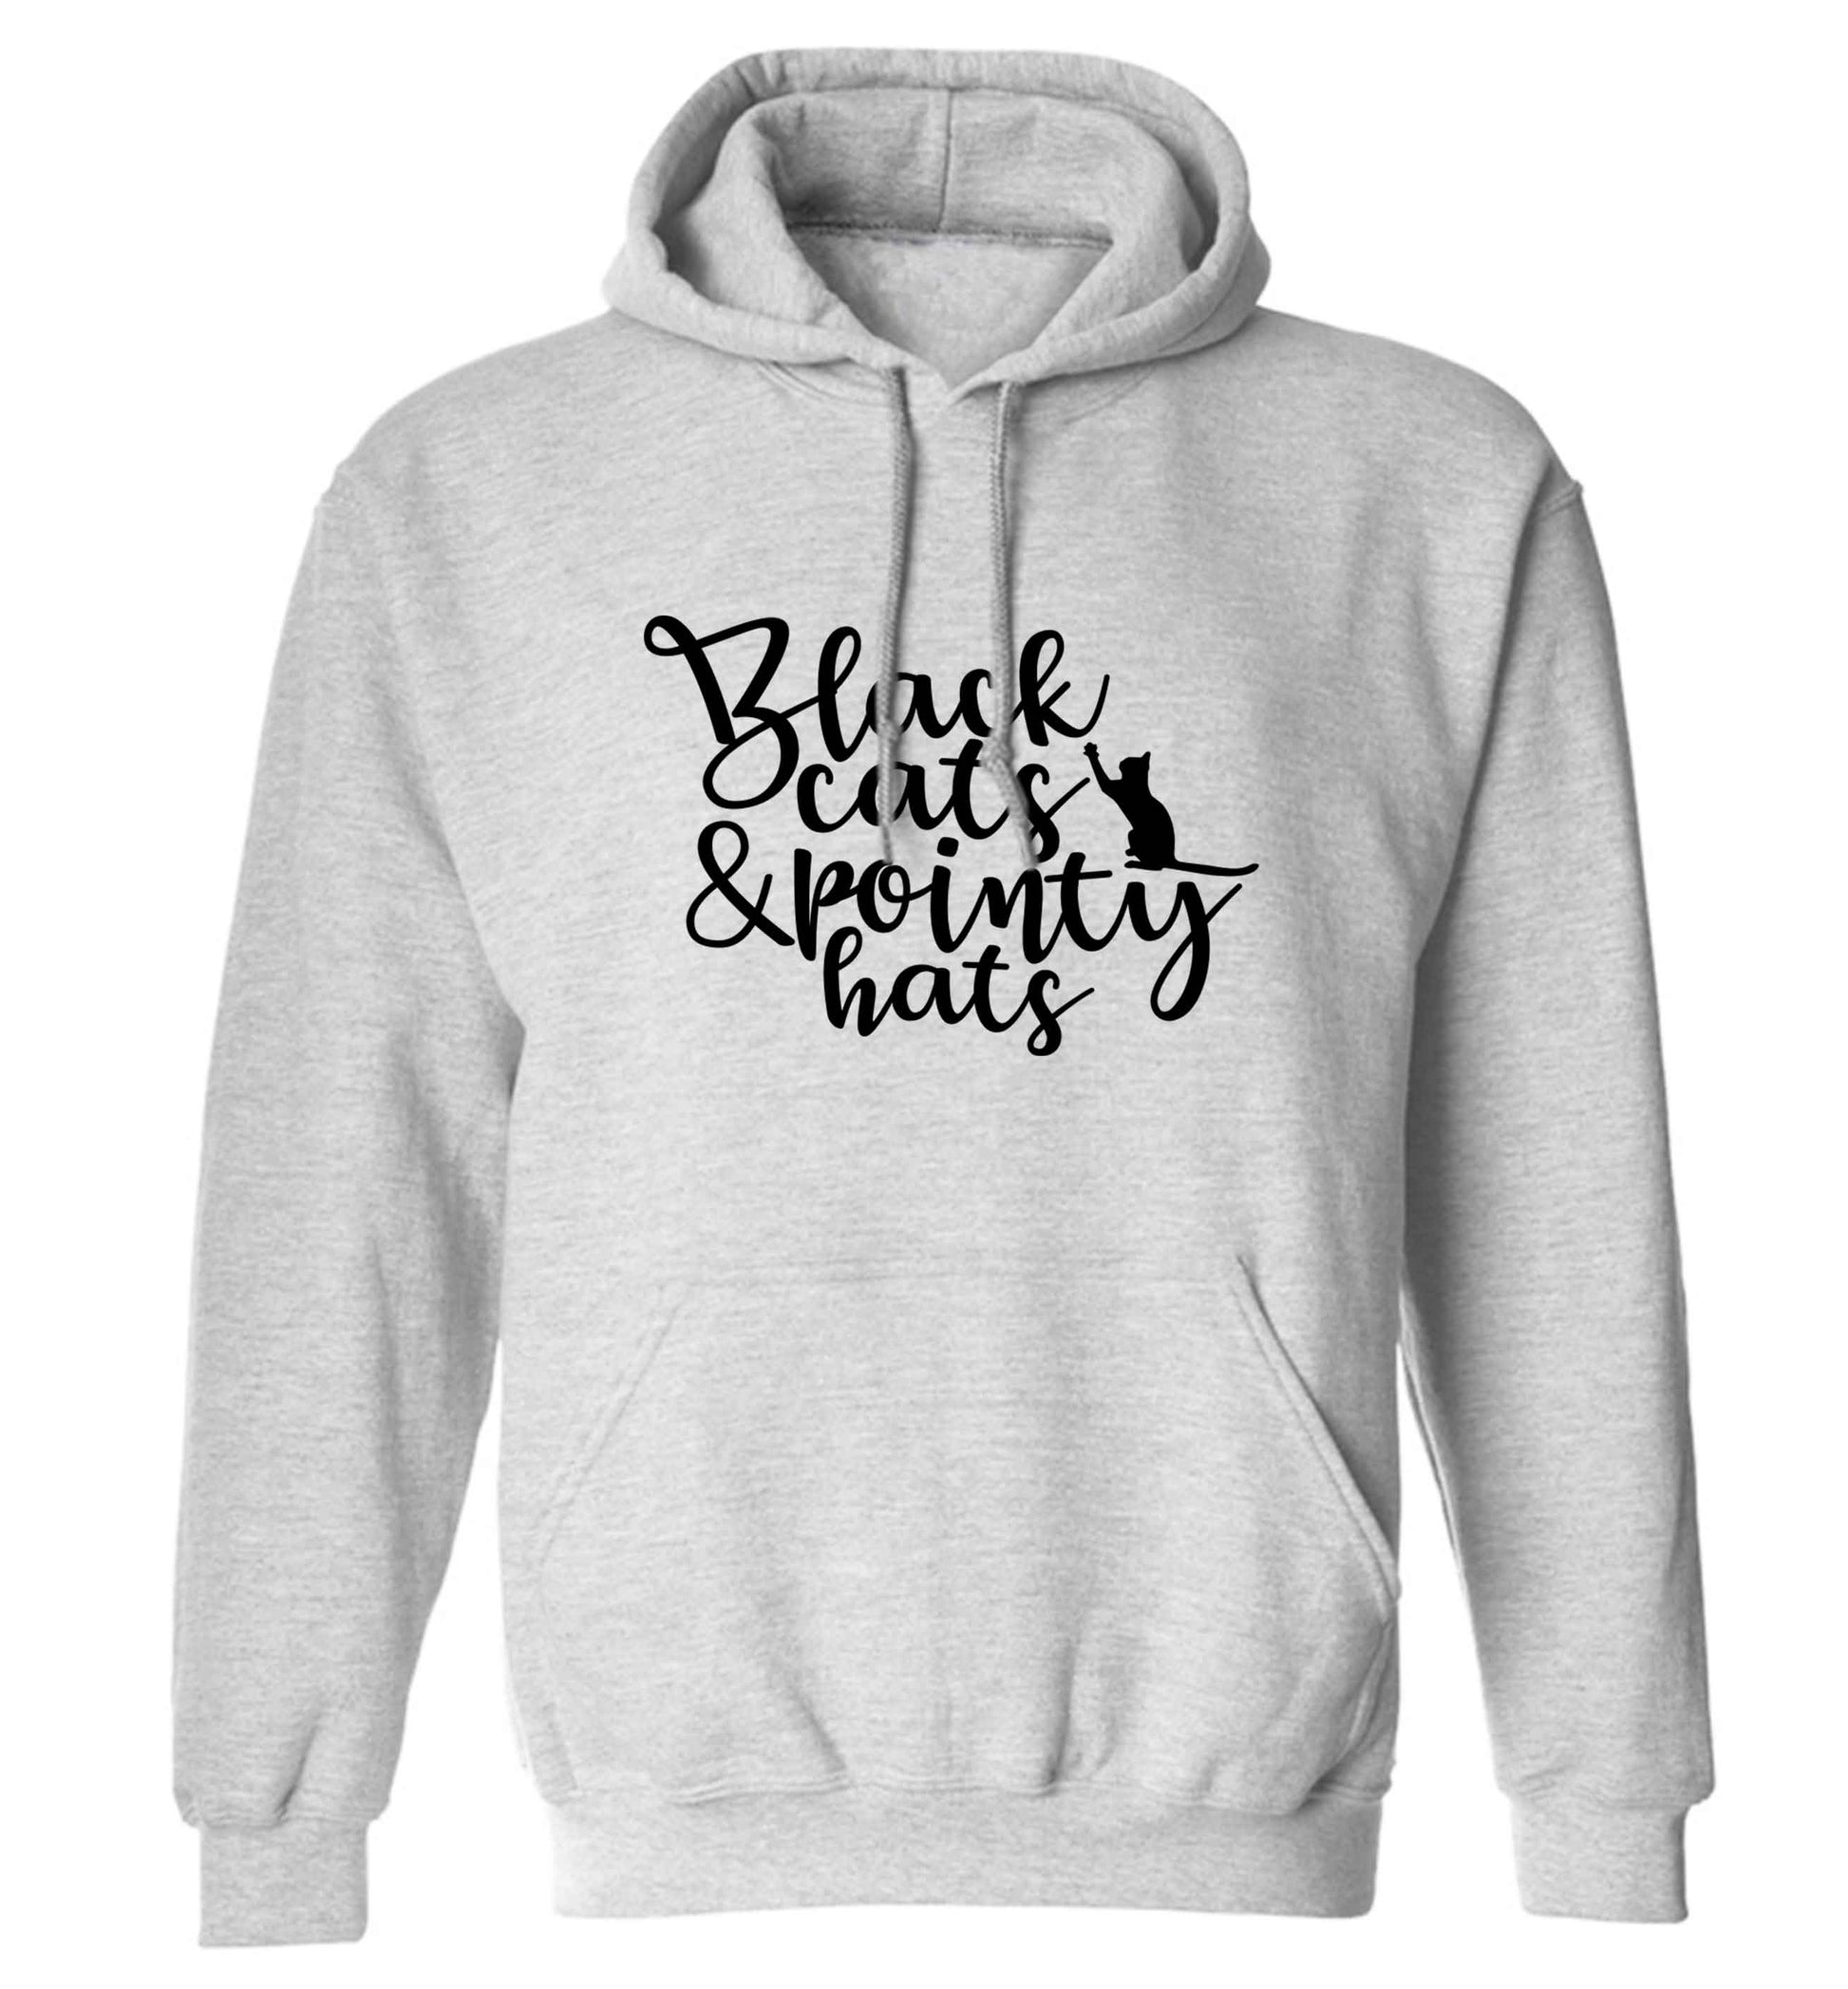 Black cats and pointy hats adults unisex grey hoodie 2XL